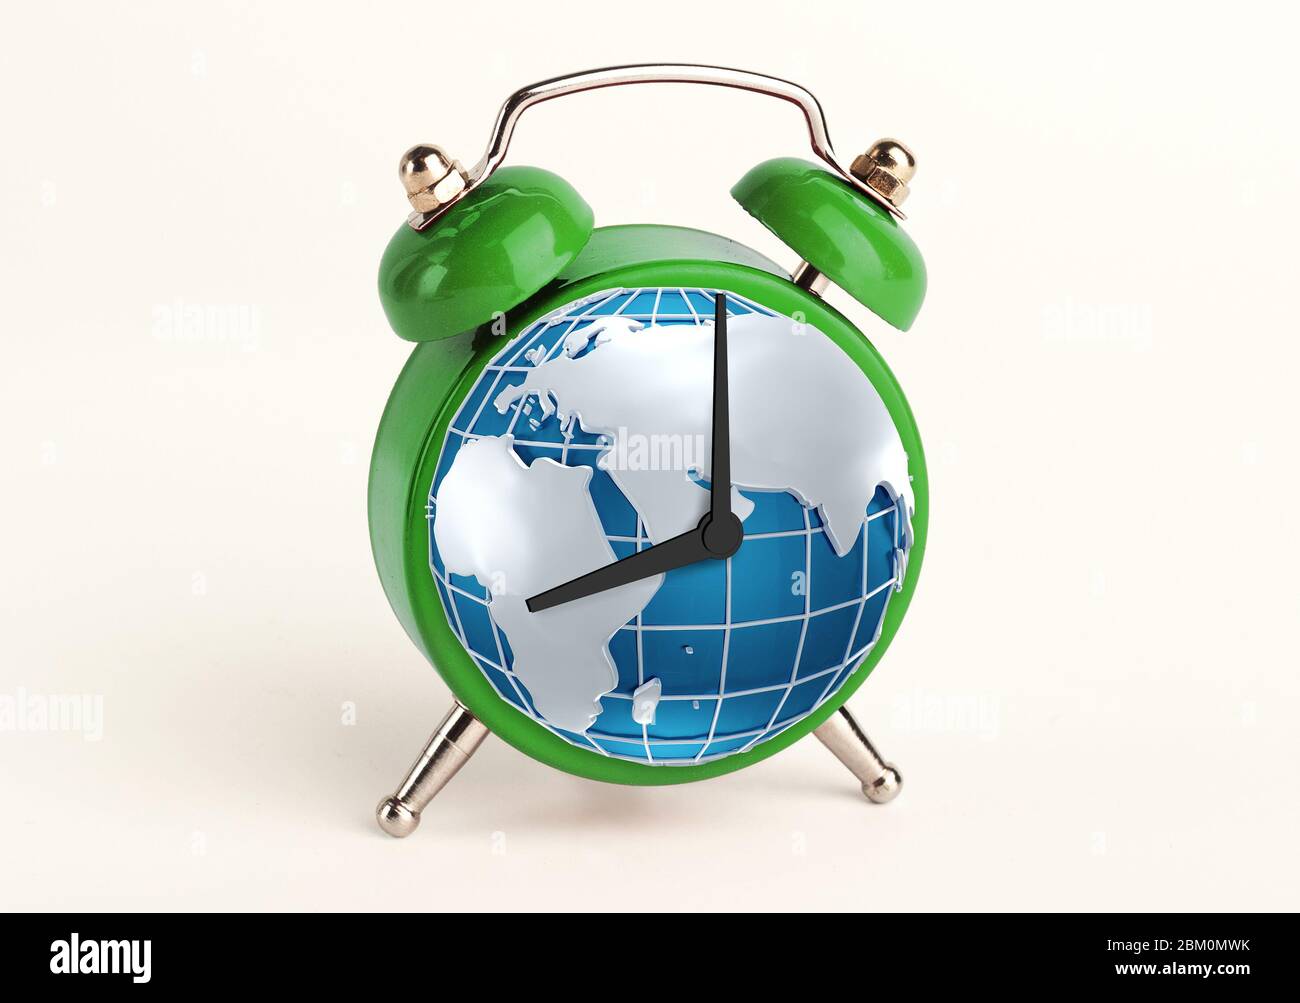 Environmental wakeup call. Collage of alarm clock with globe instead of hour face isolated on white Stock Photo